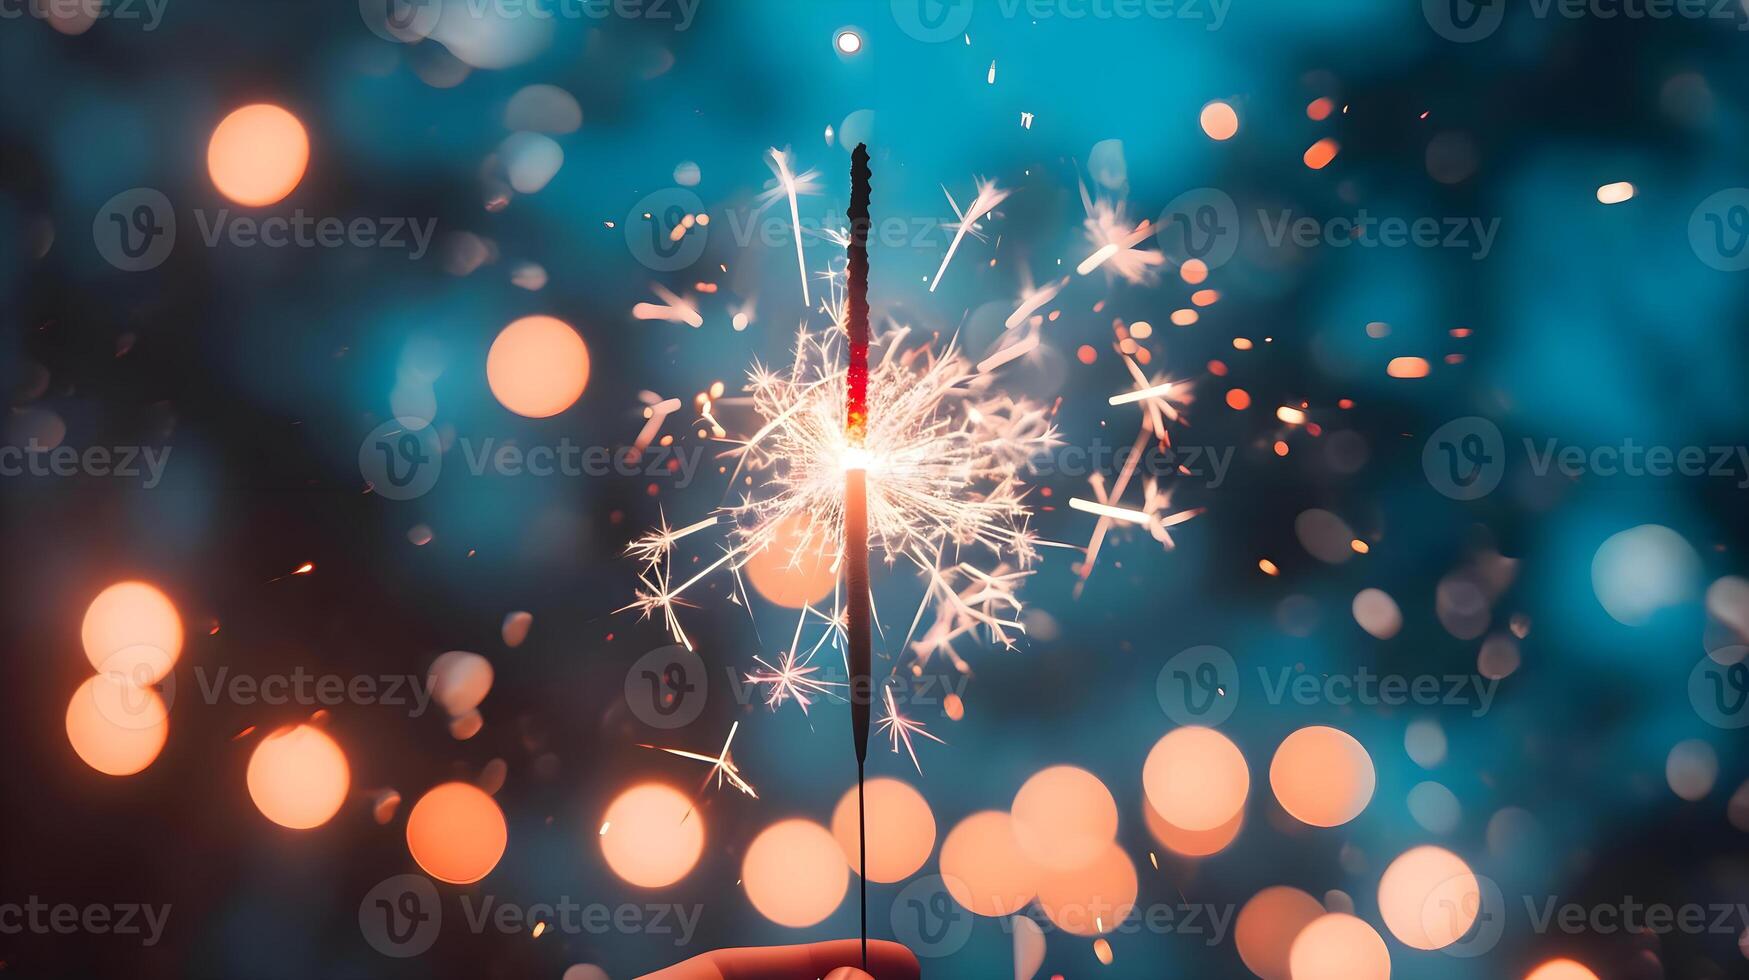 AI generated a person holding a sparkler in their hand photo